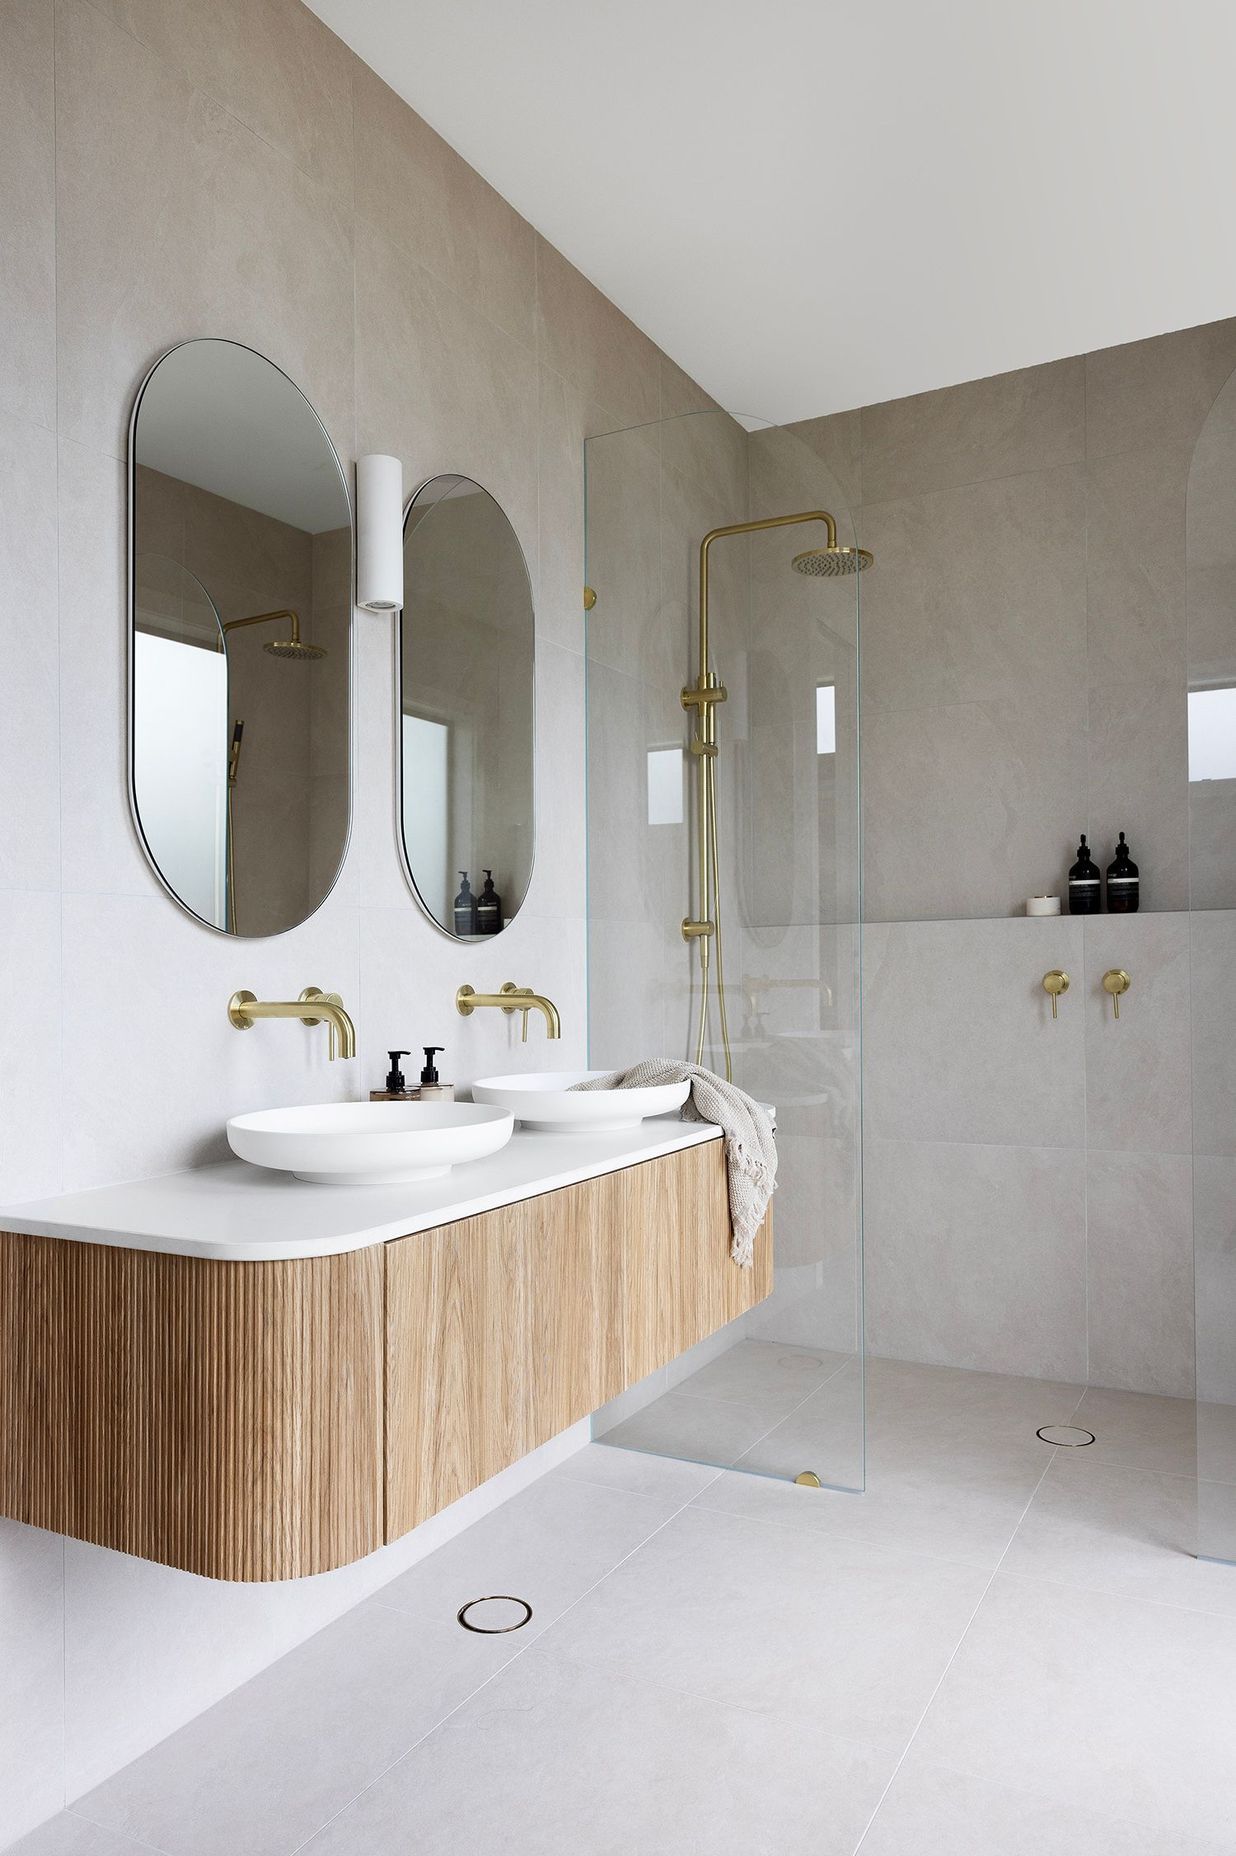 The ensuite features an ADP Bloom wall mixer in brushed brass and ADP Bloom wall spout in brushed brass.